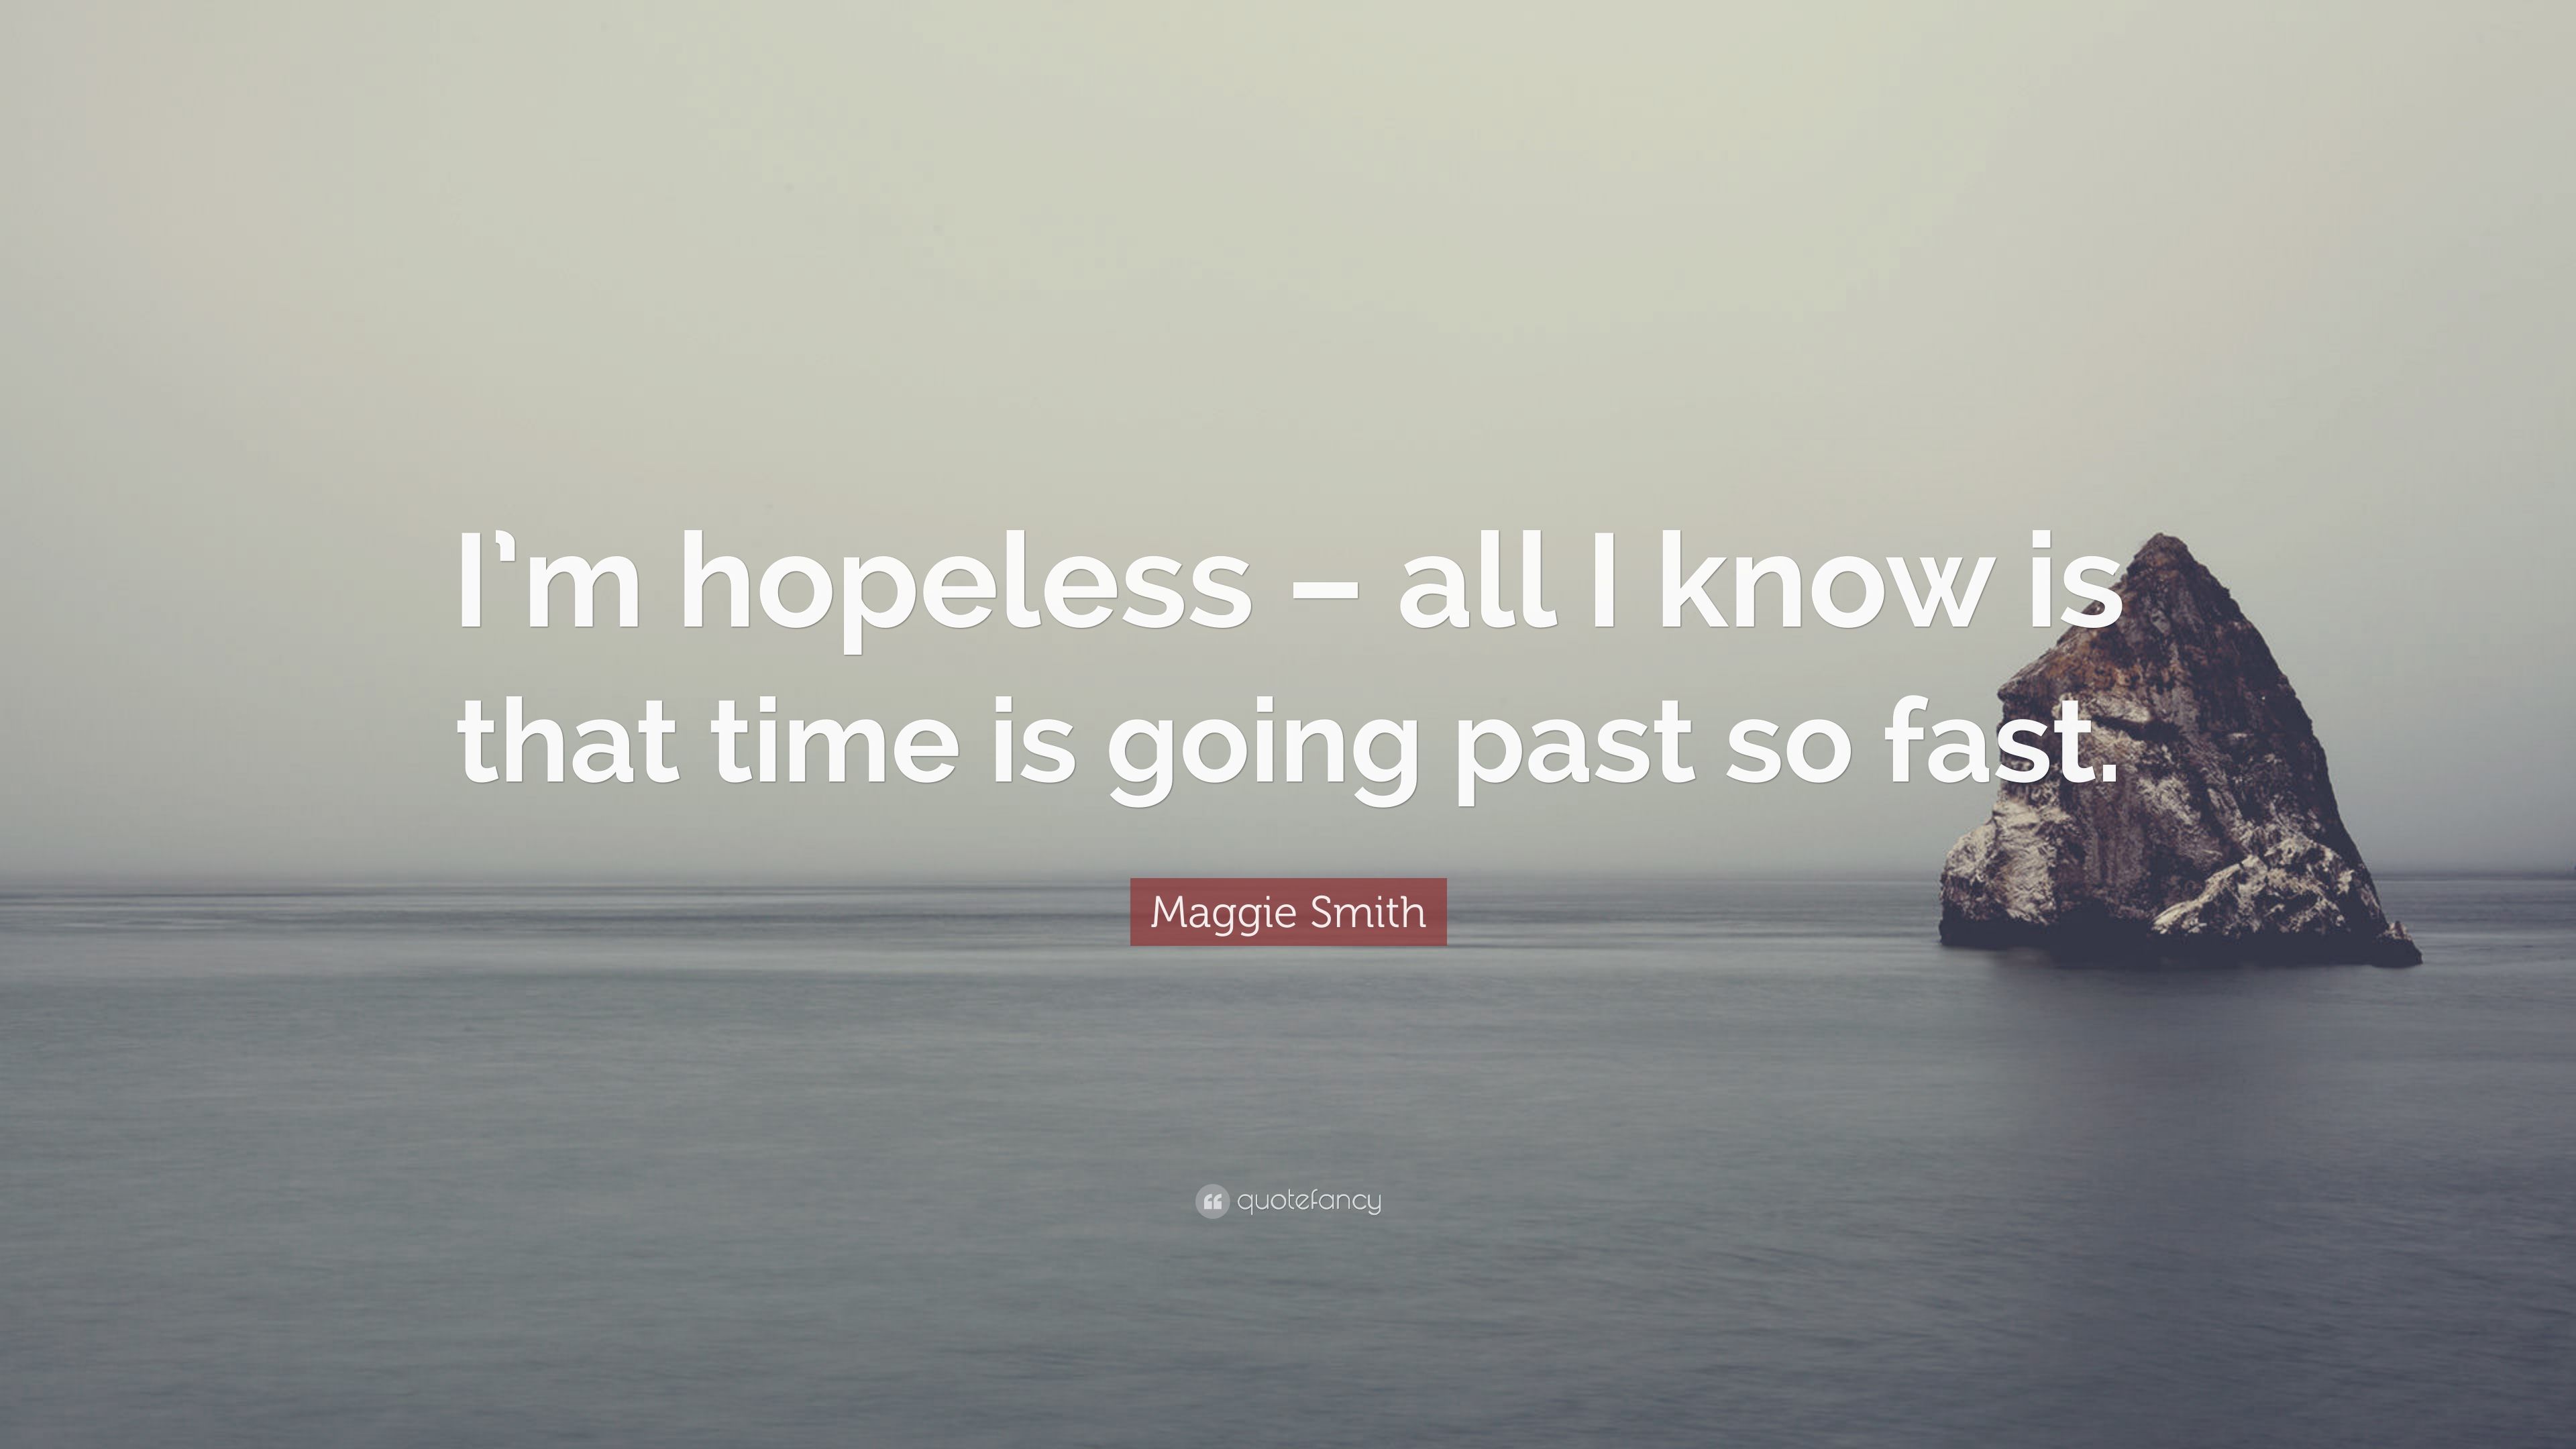 Maggie Smith Quote: “I'm hopeless